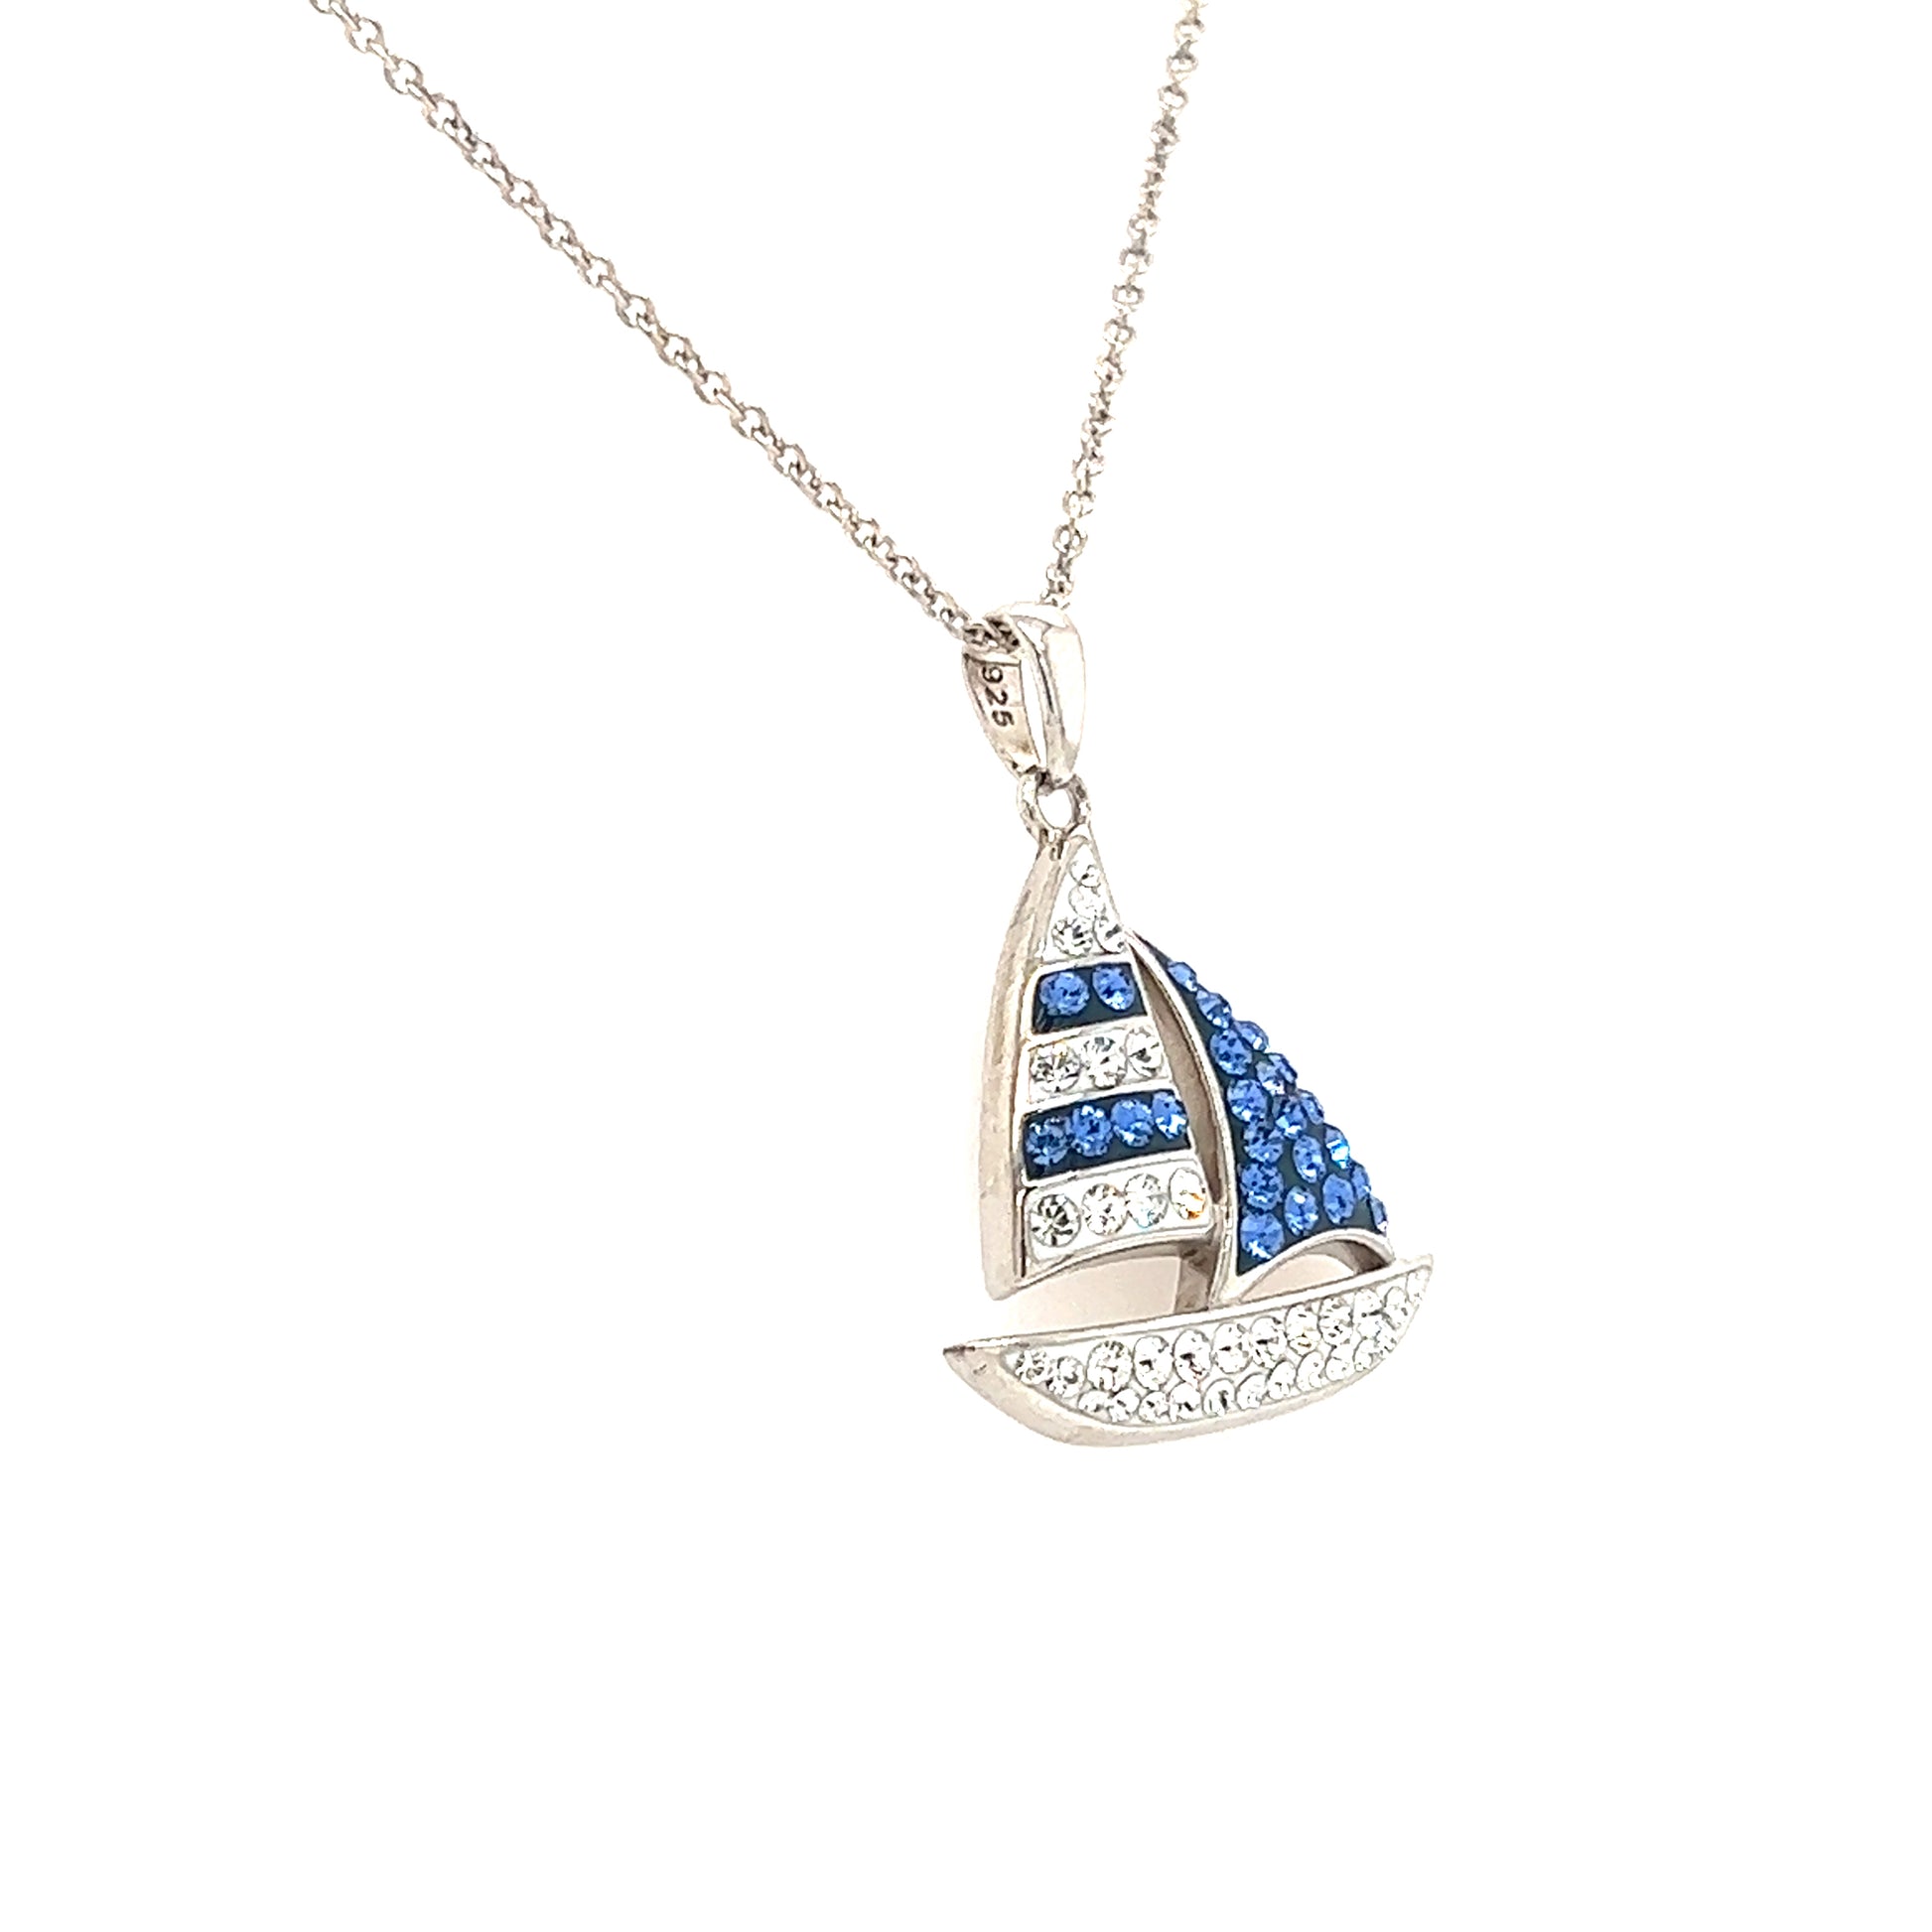 Blue Sailboat Necklace with Blue and White Crystals in Sterling Silver Right Side View